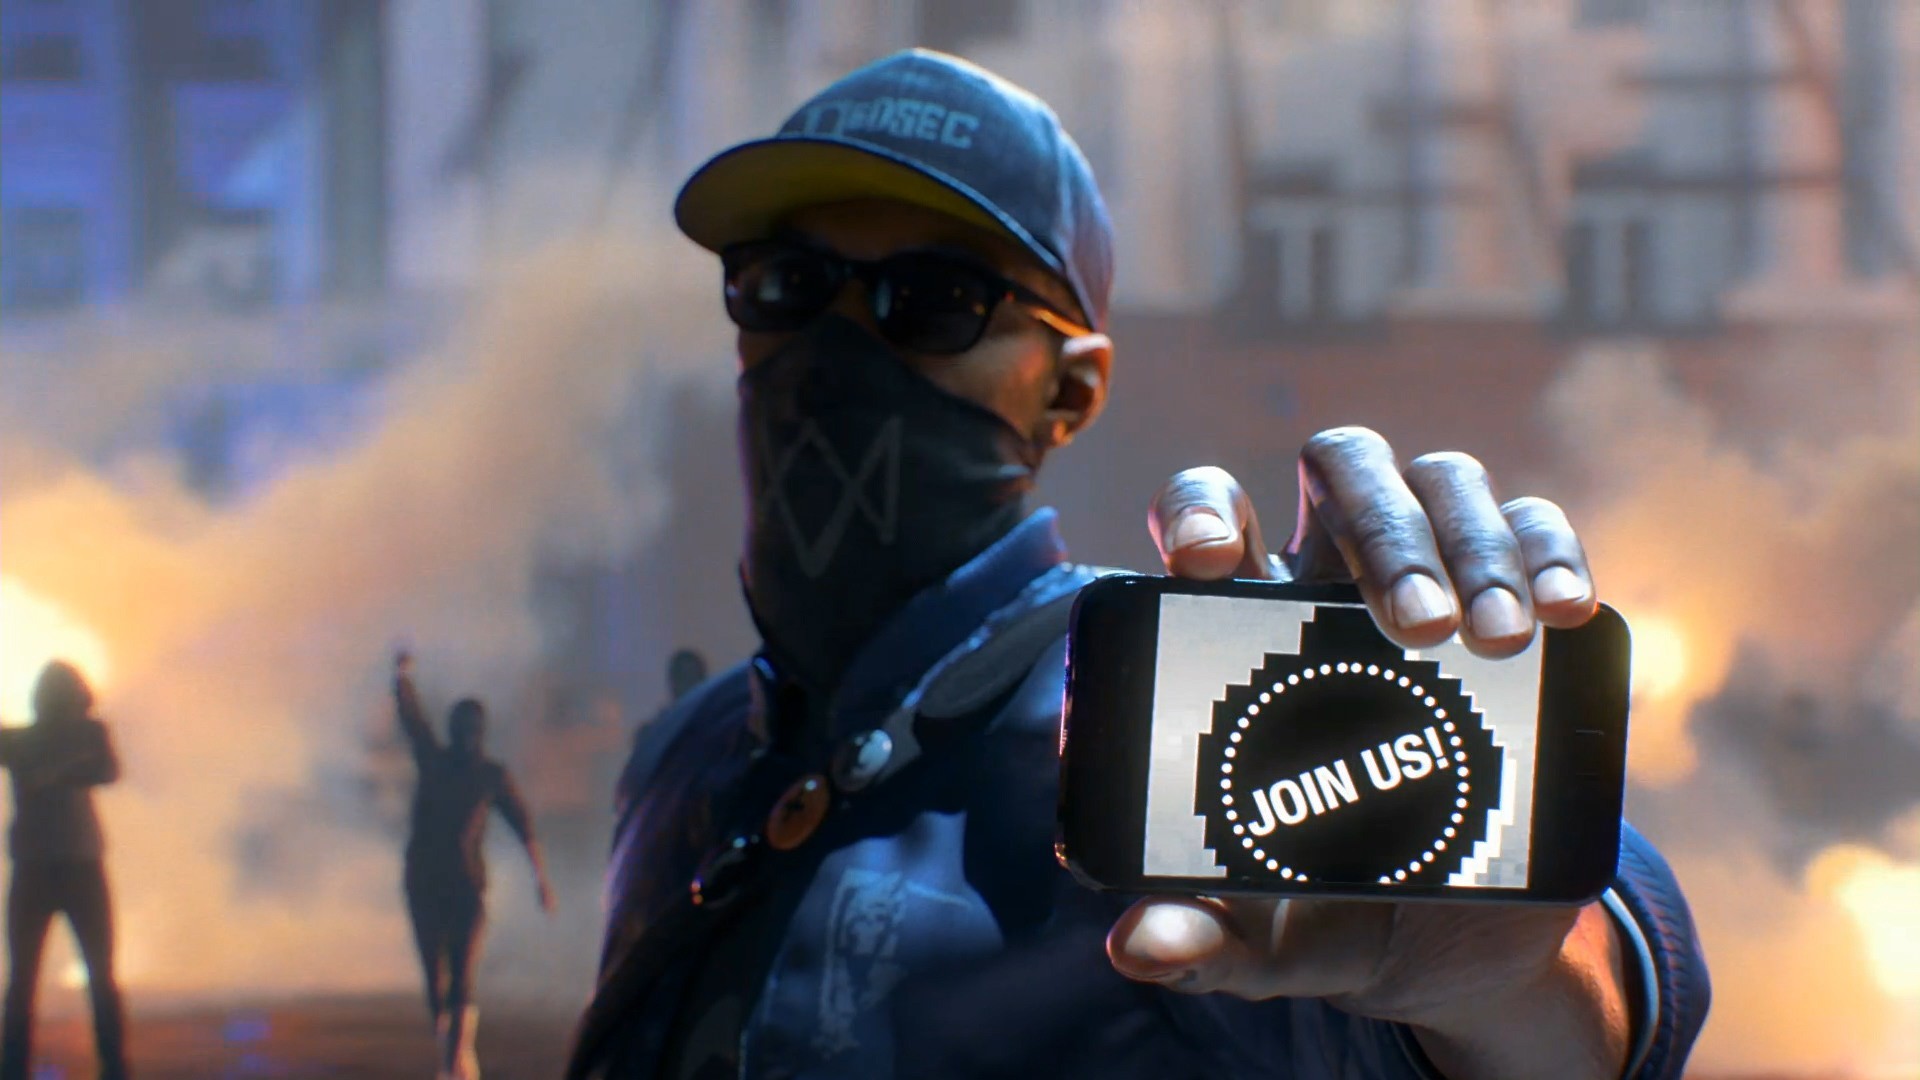 #hacking, #watch Dogs 2, #upcoming Games, #hackers, - Watch Dogs 2 Wallpaper Hd , HD Wallpaper & Backgrounds